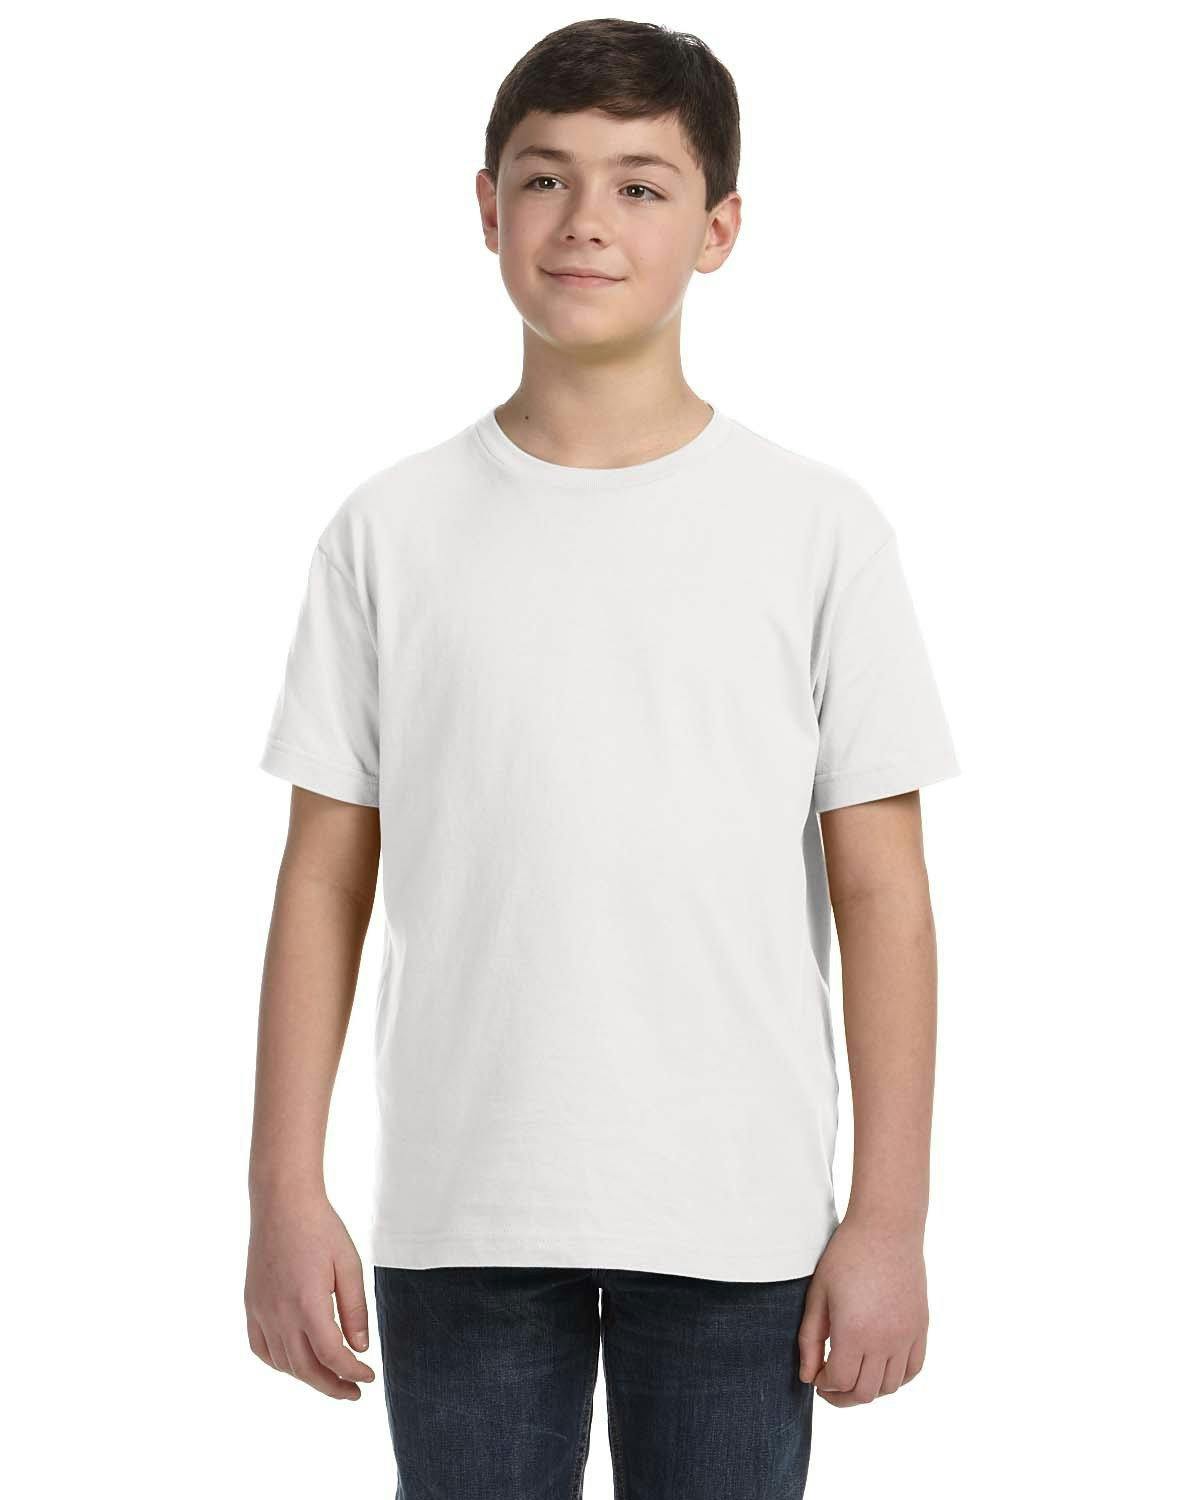 Image for Youth Fine Jersey T-Shirt